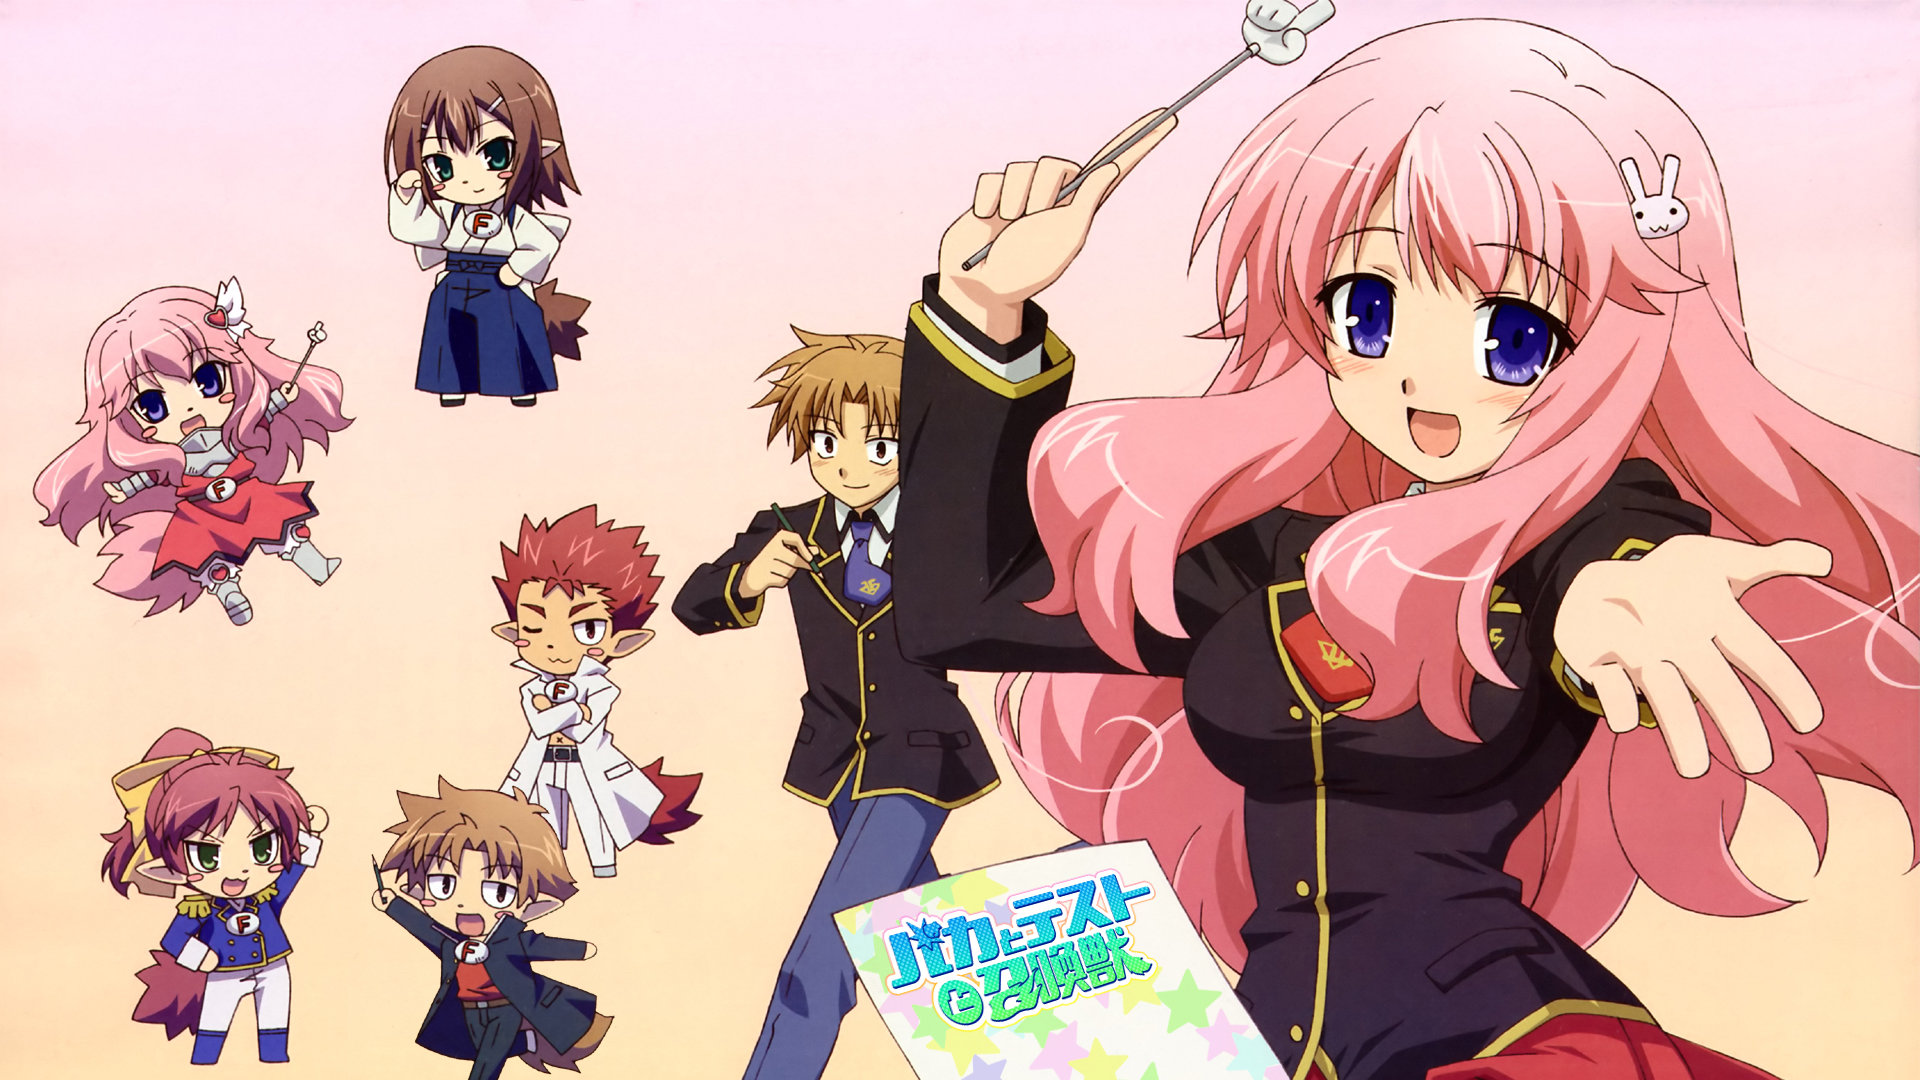 Download 1080p Baka And Test desktop background ID:183553 for free